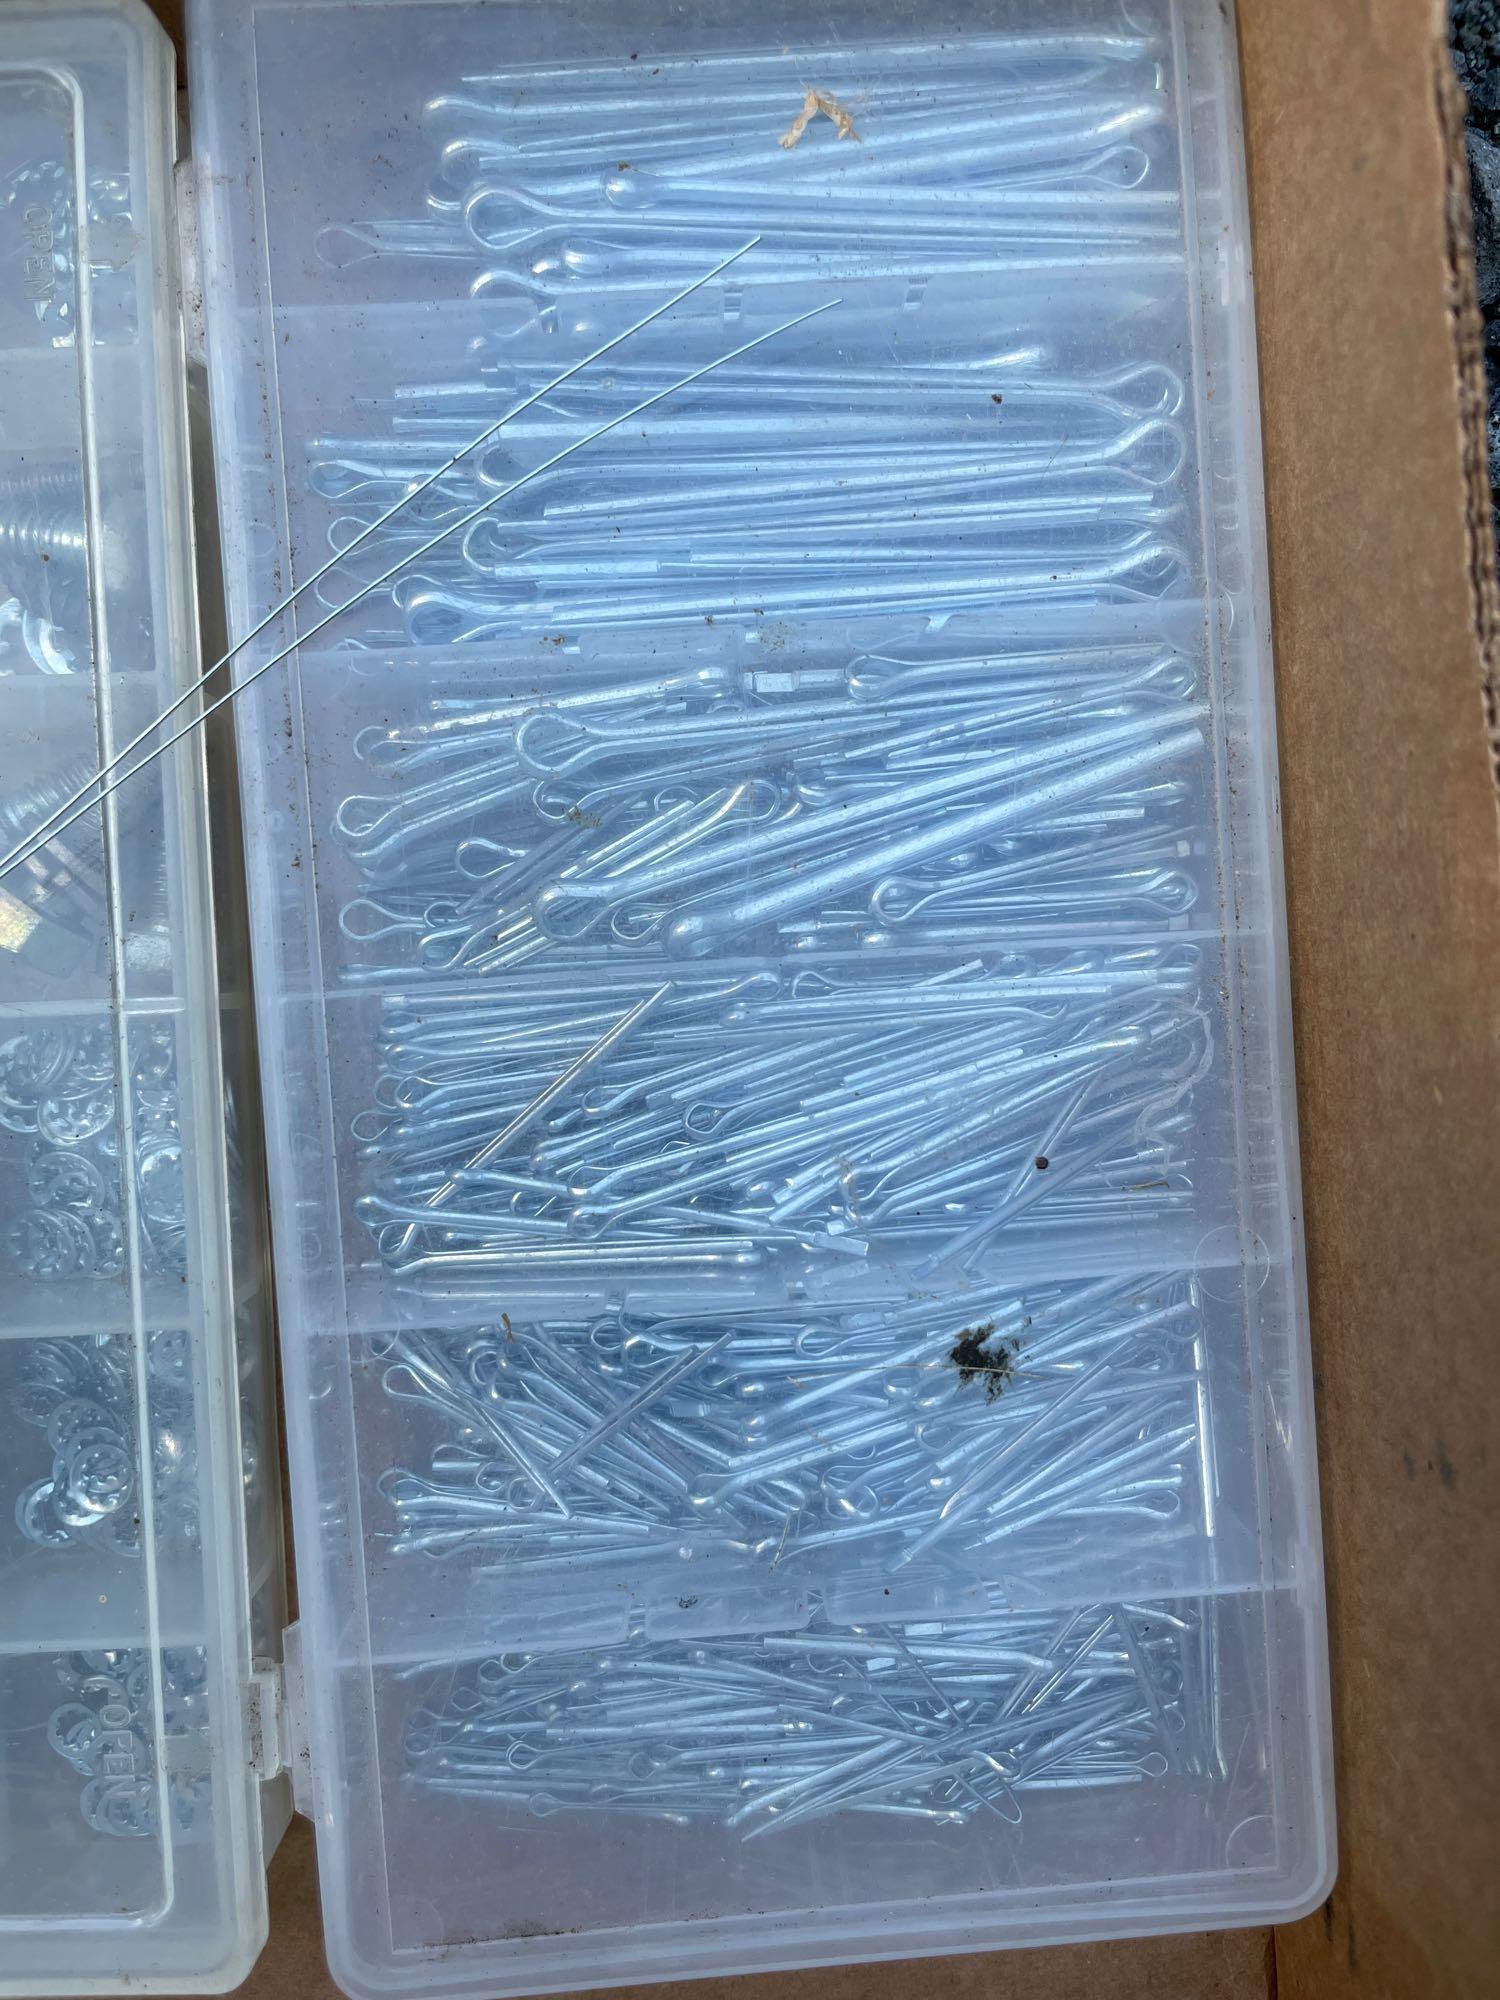 Cotter pins, wing nuts, fuses, organized hardware